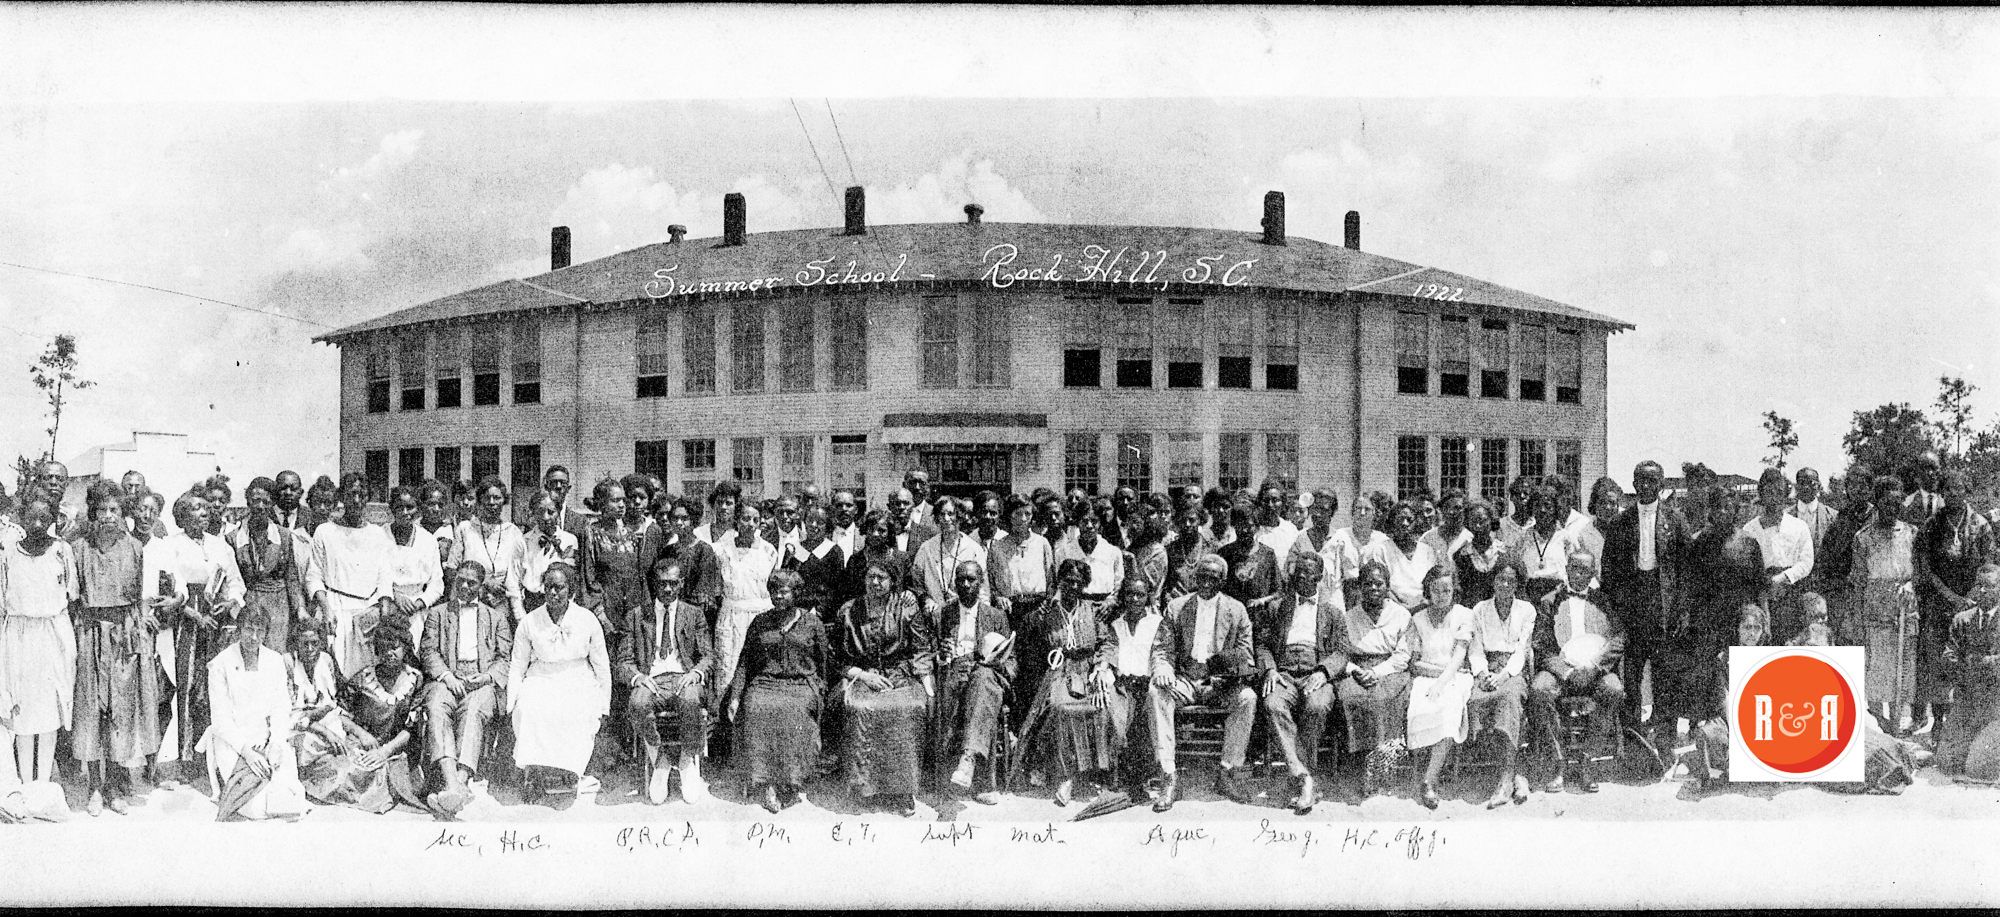 Image taken of Emmett Scott High School in 1922. This fantastic image was donated to HRH by Mr. Randy Mulkey of N.C. who was from Rock Hill and donated the picture for preservation in 2011. 